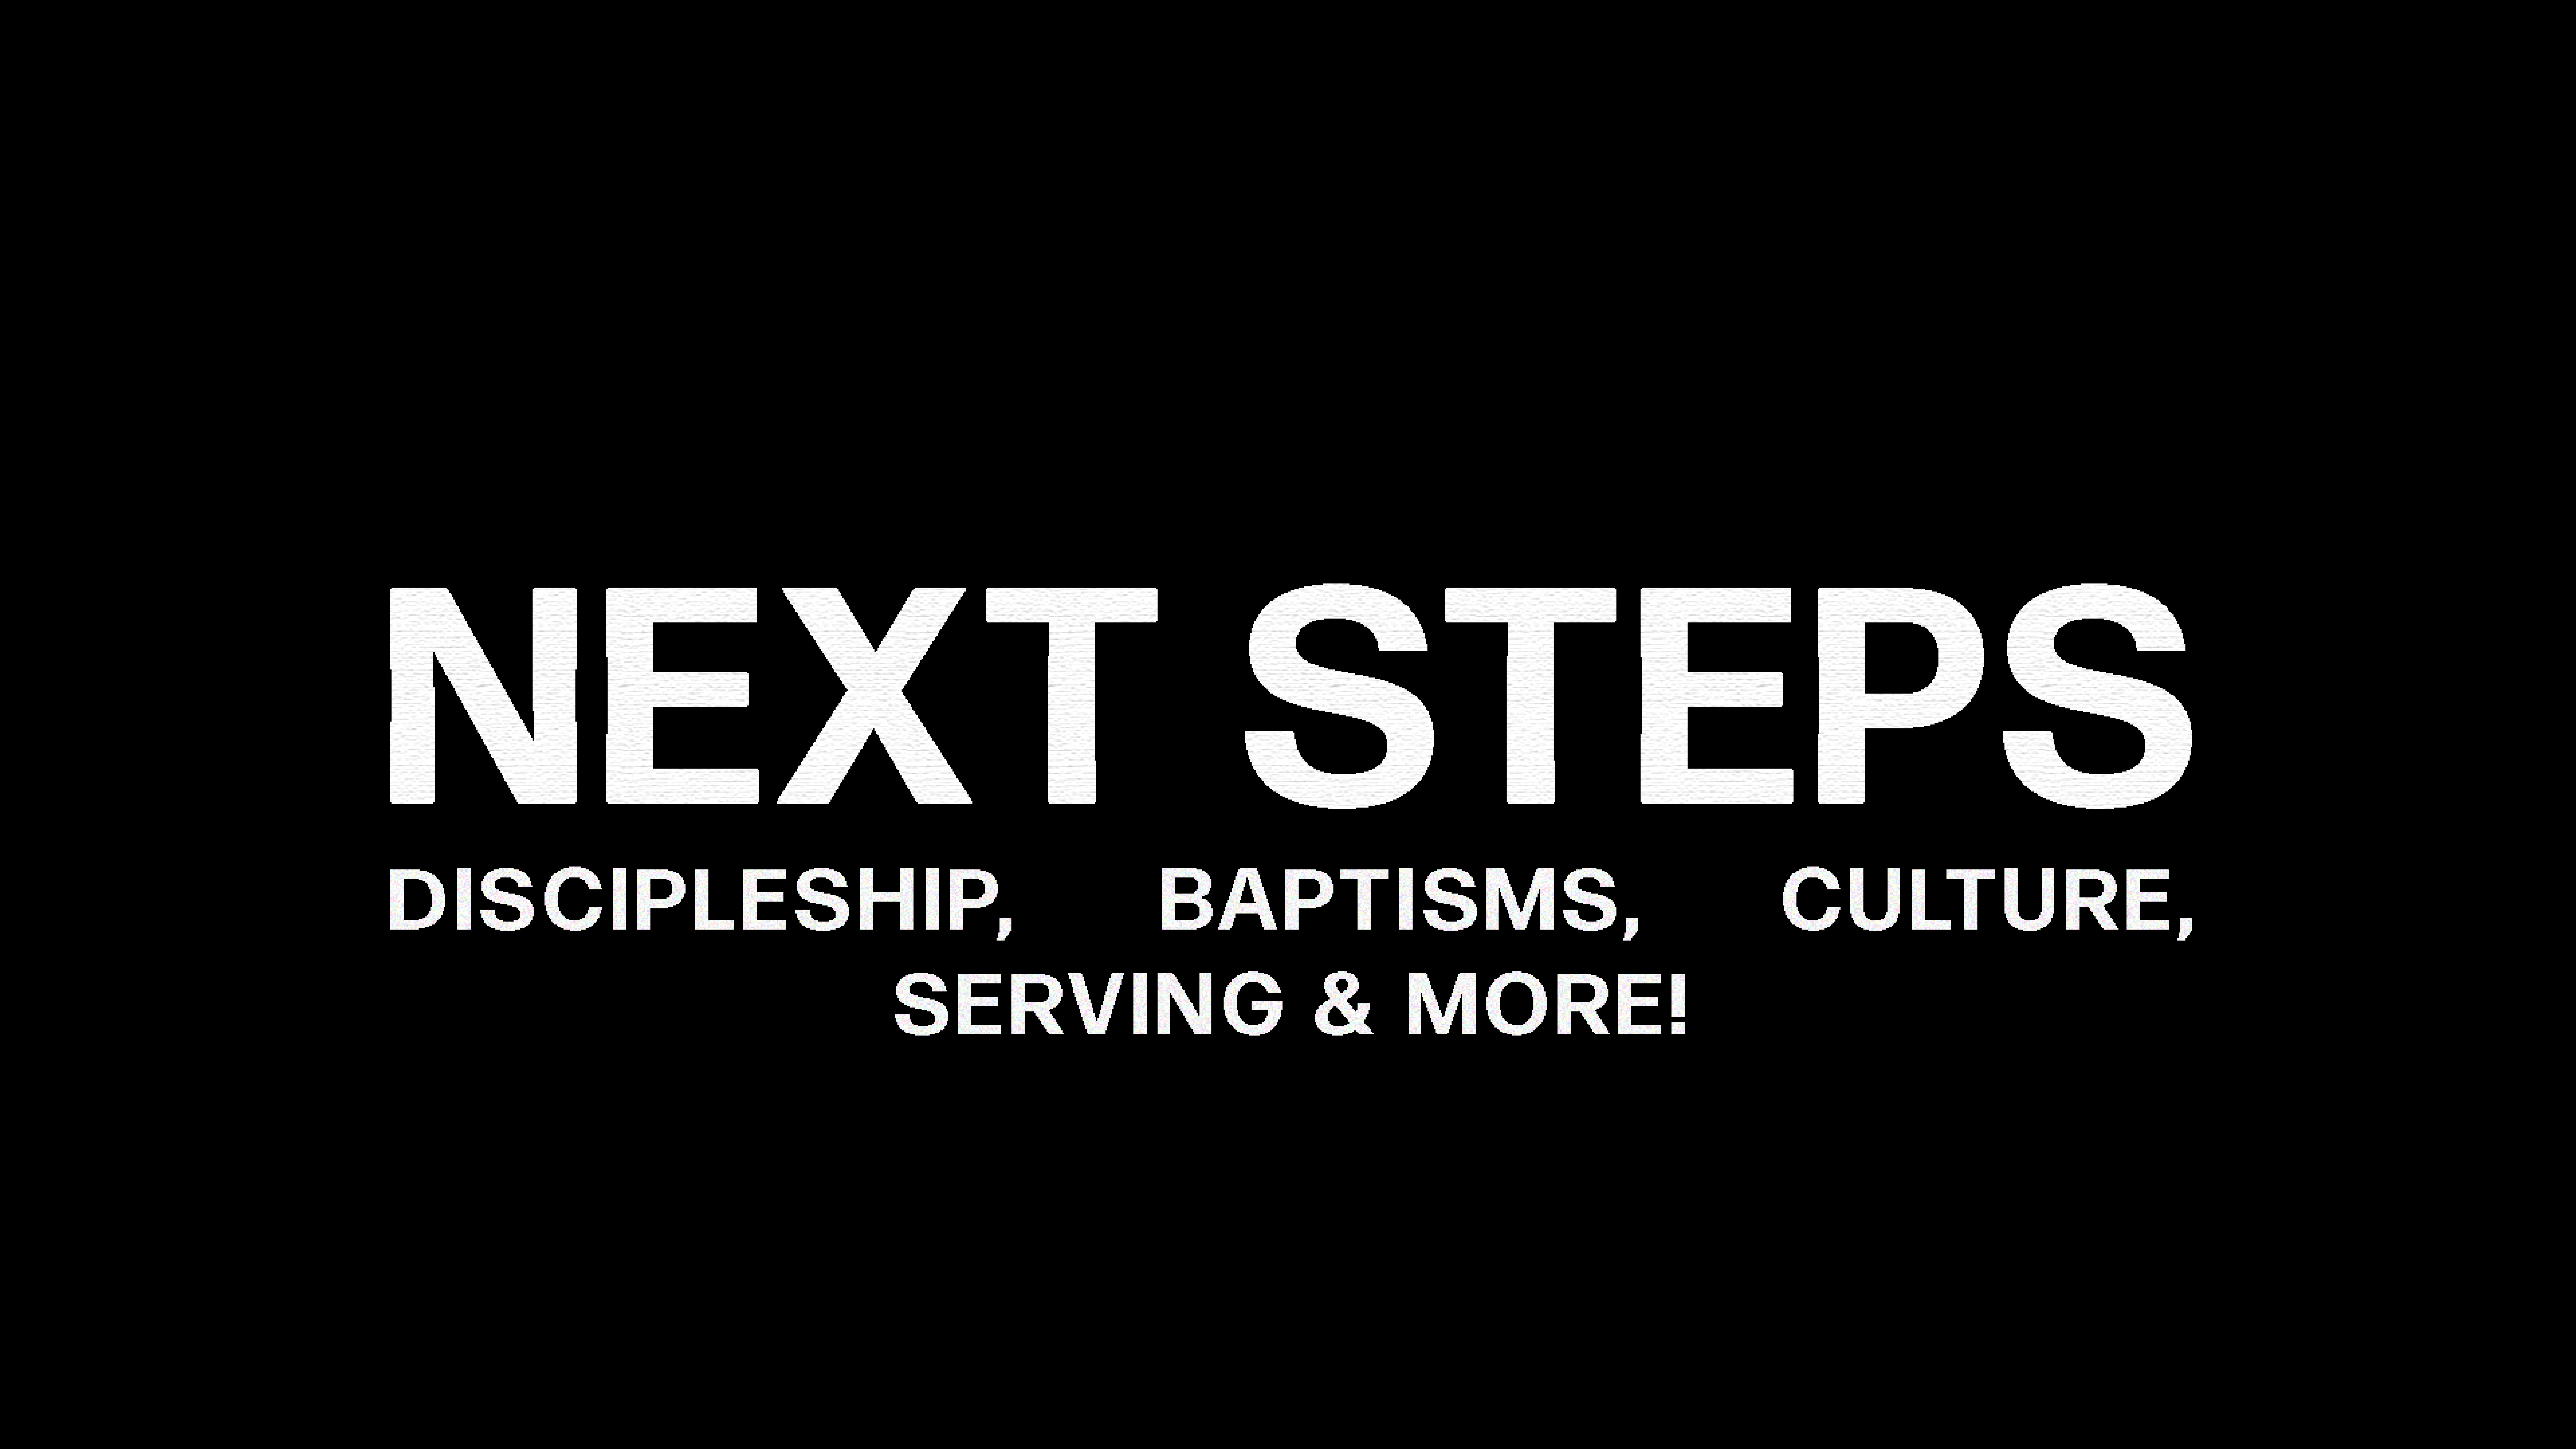 Next Steps at the Orange County campus